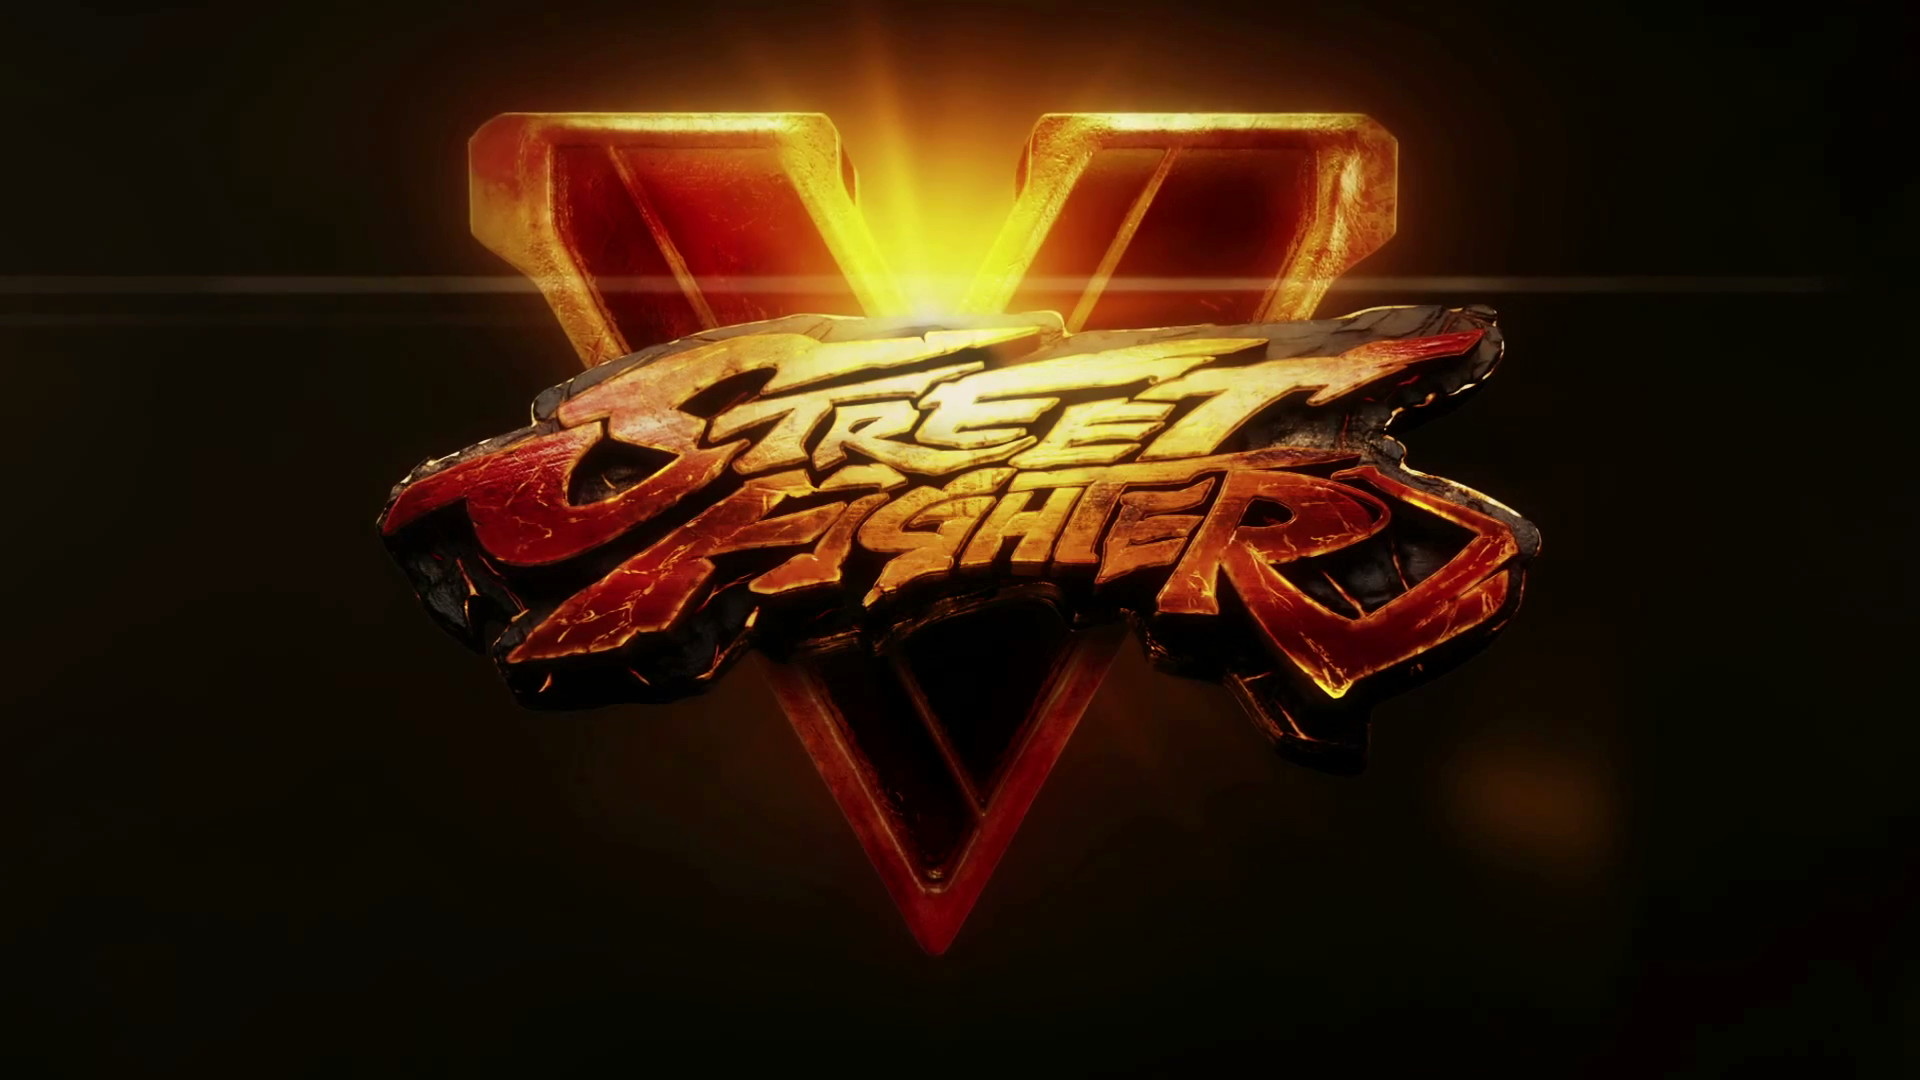 1920x1080 Street Fighter 5 Wallpapers